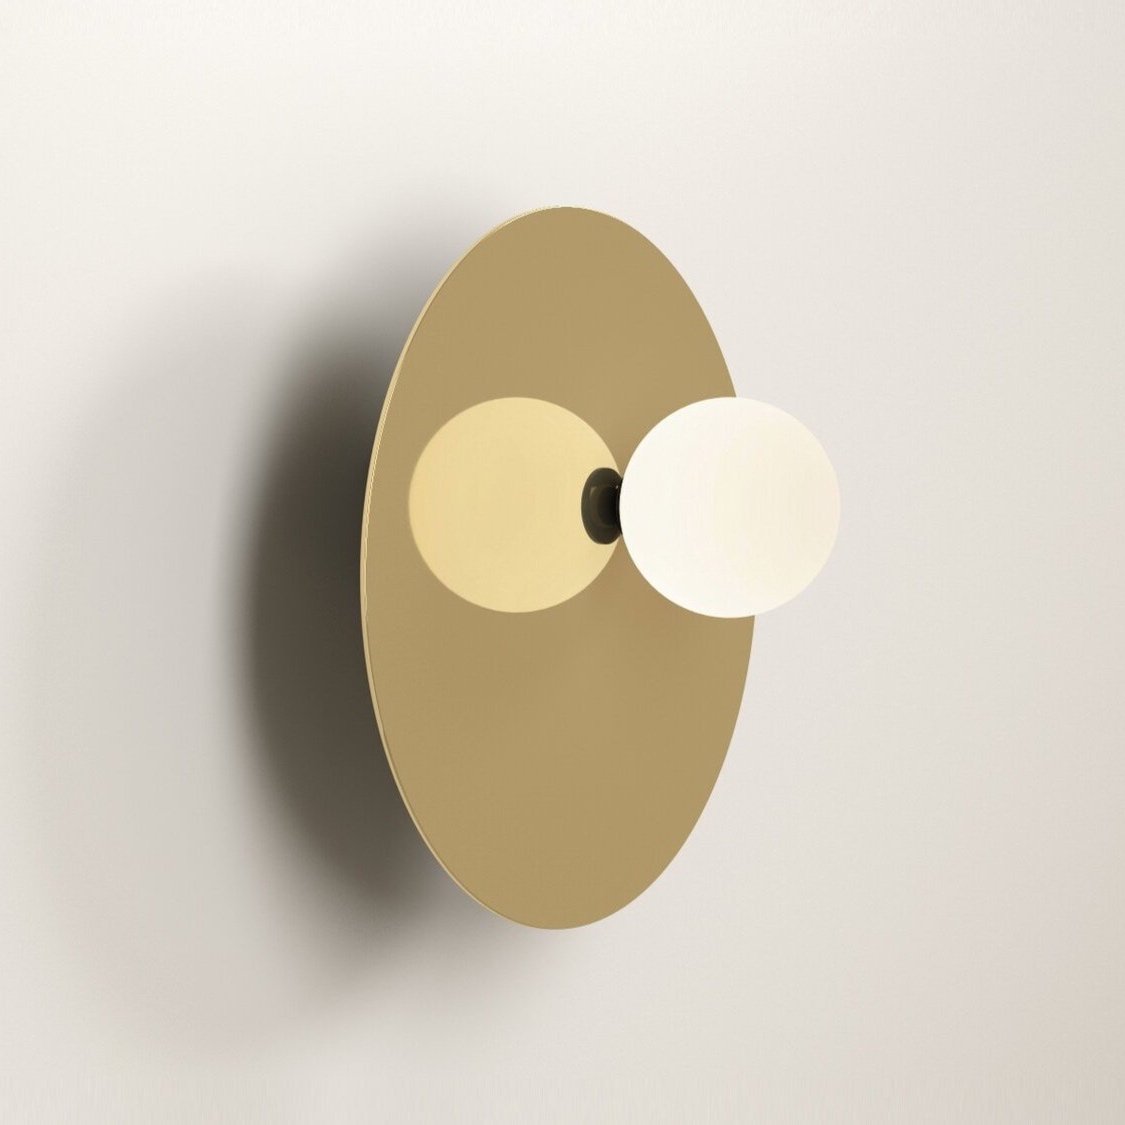 DISC AND SPHERE WALL LIGHT / ASYMMETRIC / POLISHED BRASS